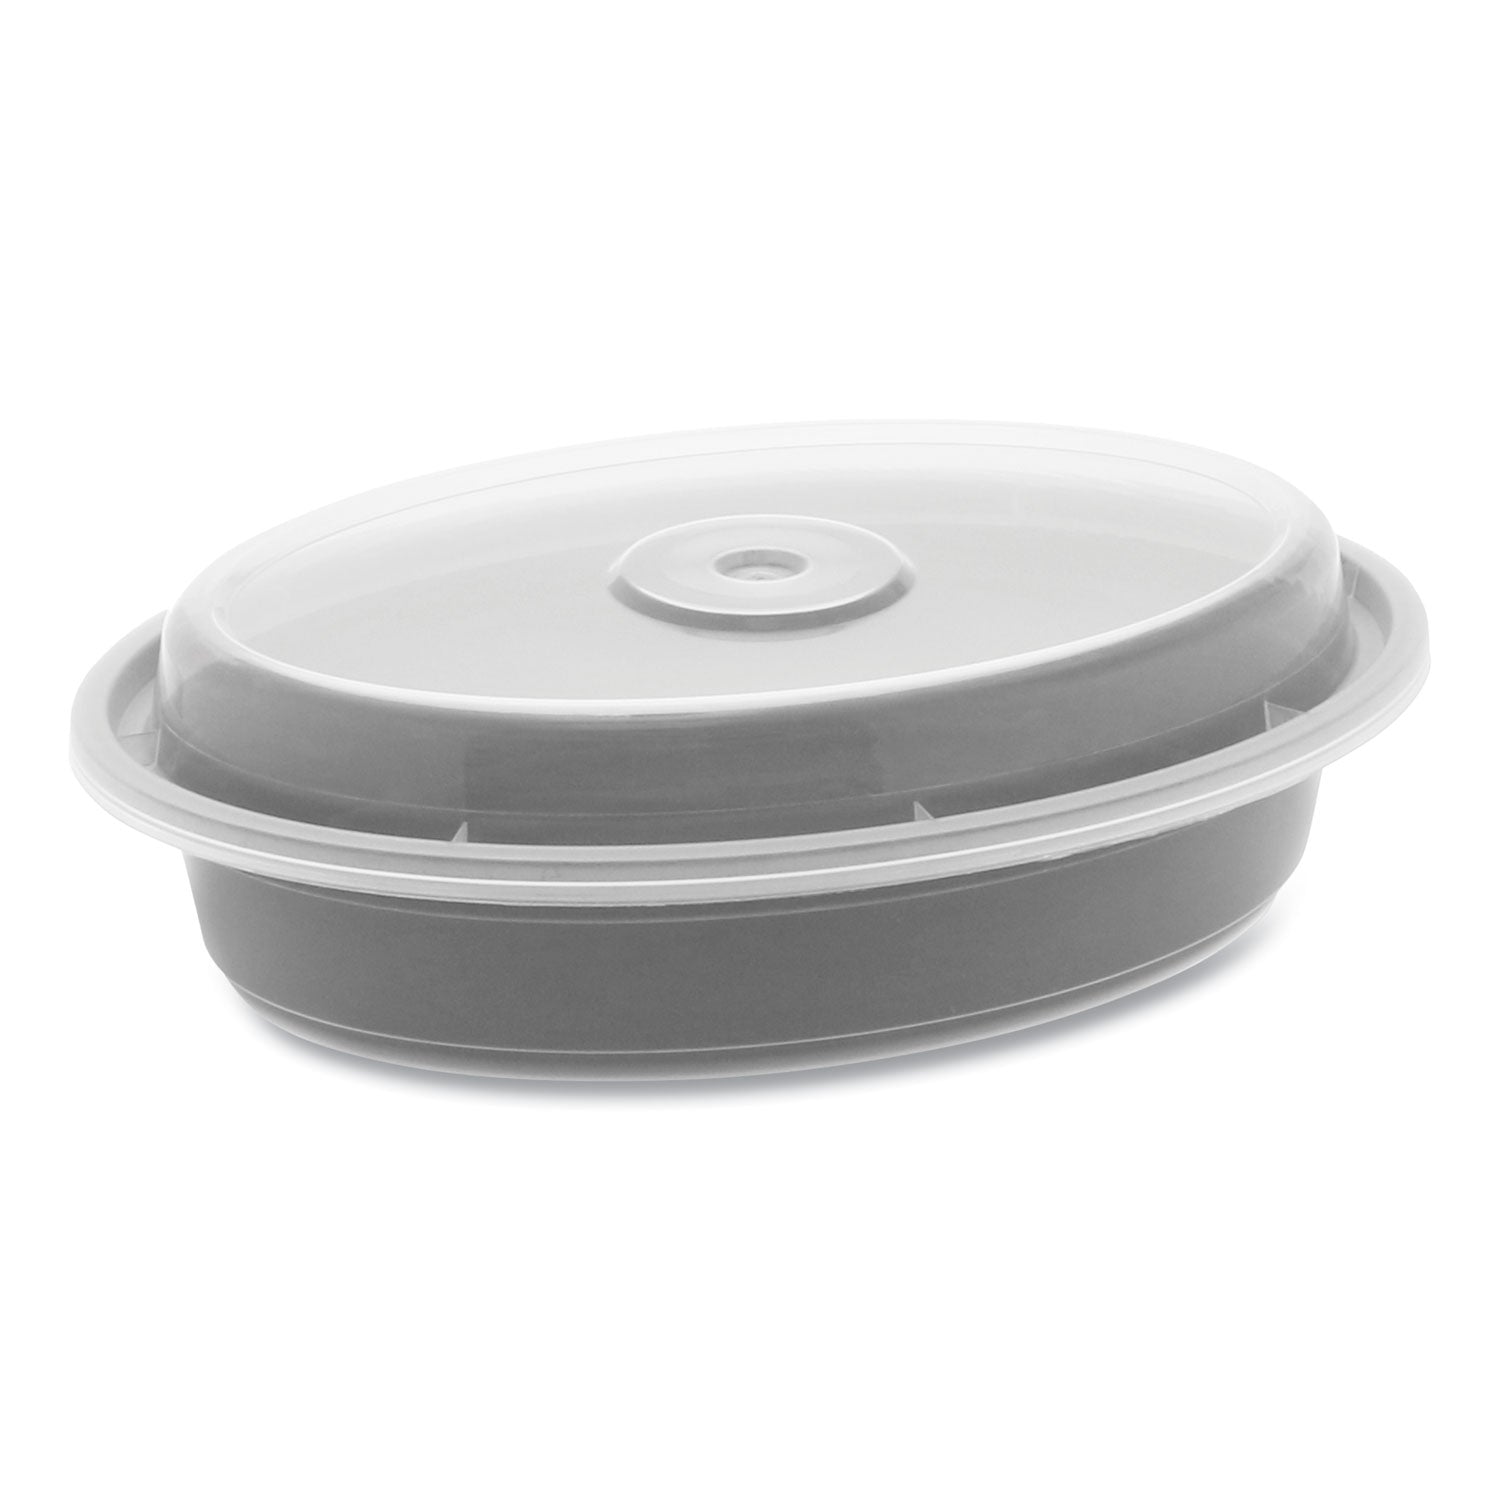 newspring-versatainer-microwavable-containers-oval-12-oz-68-x-48-x-145-black-clear-plastic-150-carton_pctoc12b - 1